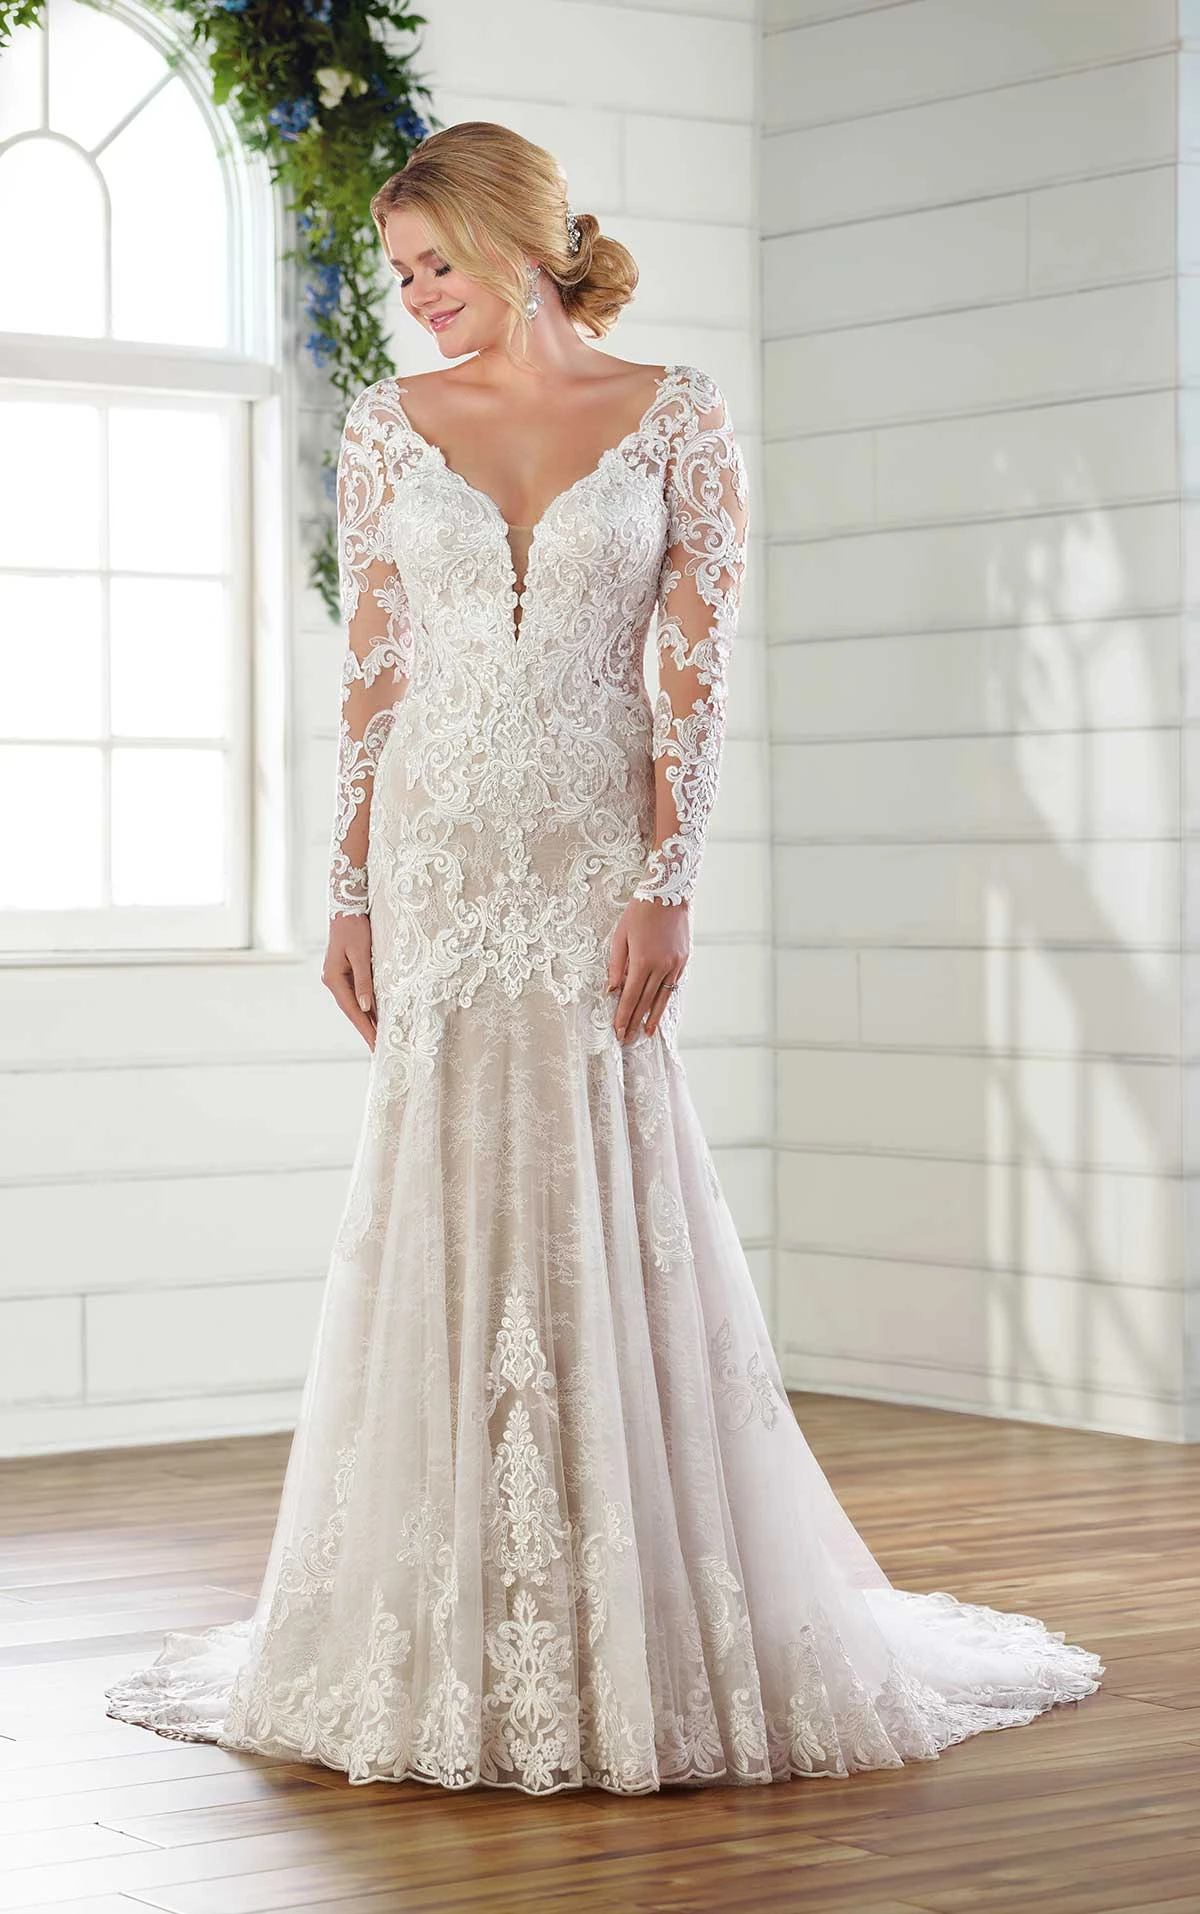 LongSleeved Lace Wedding Dress with Open Back